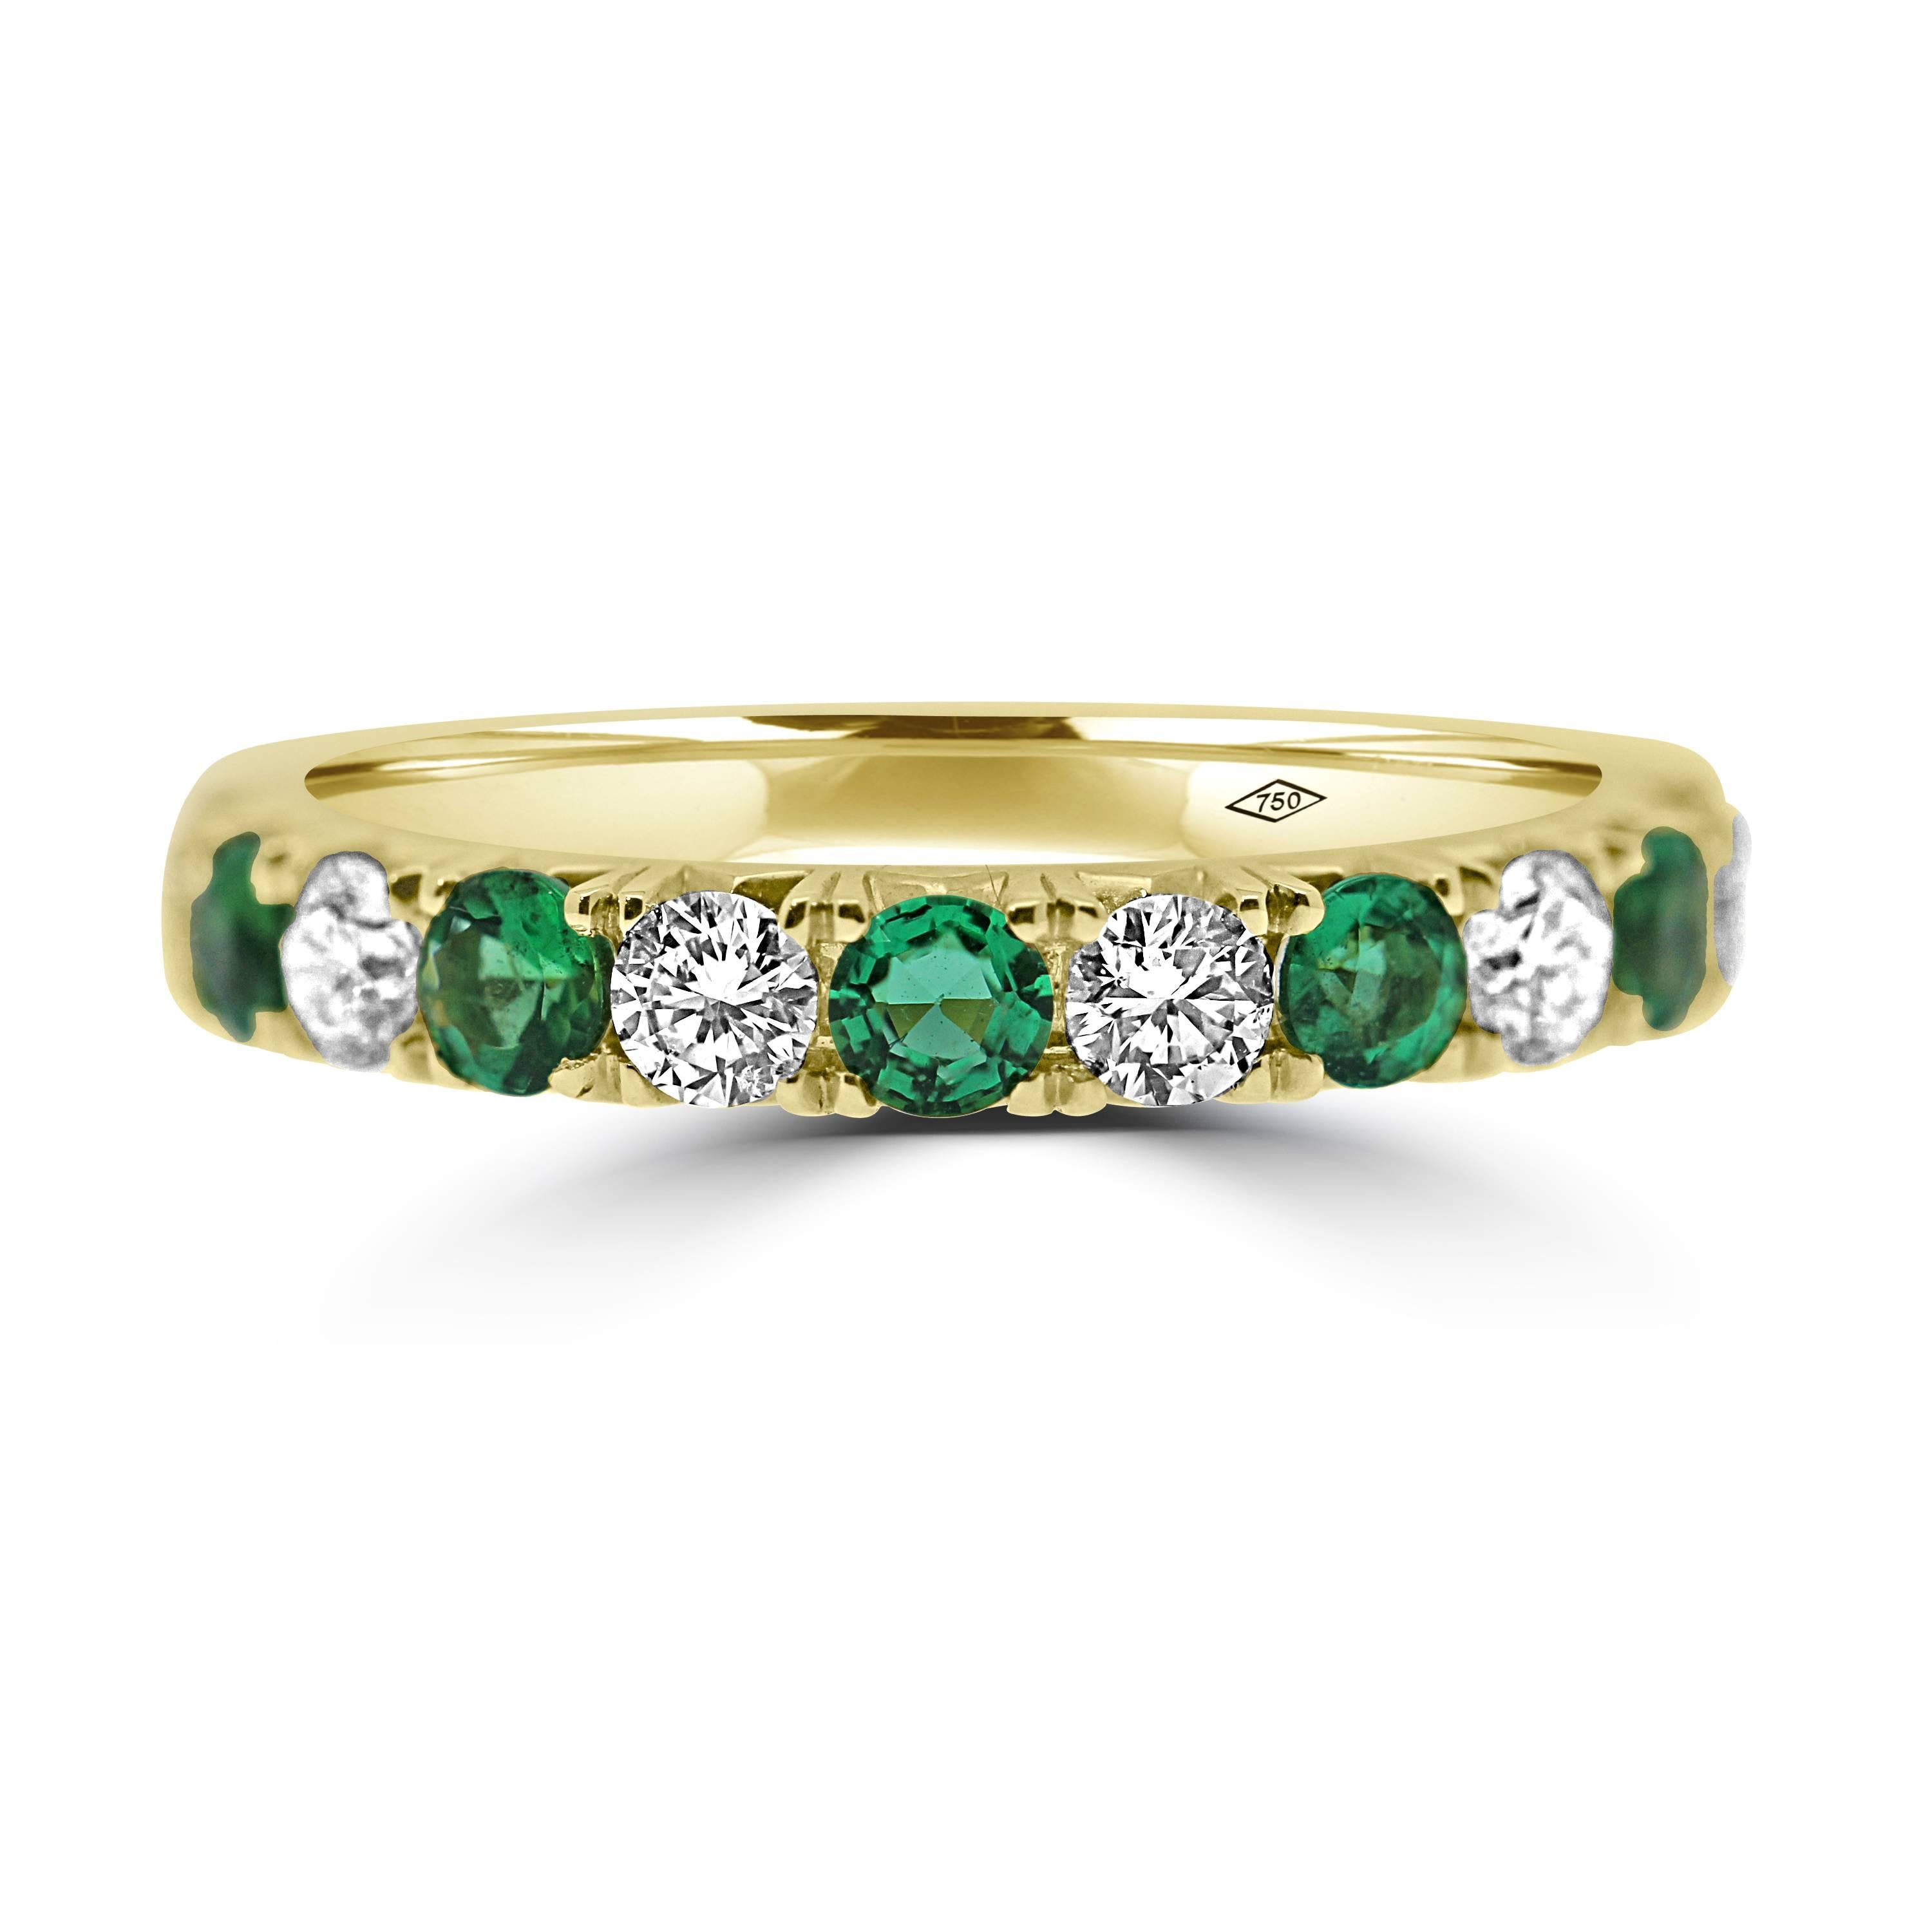 elegant and classy eternity band,
half set with brilliant cut diamonds of 0.51ct total and emerald gemstones of 0.44ct total, mounted in 18kt yellow gold.
Winston special setting.